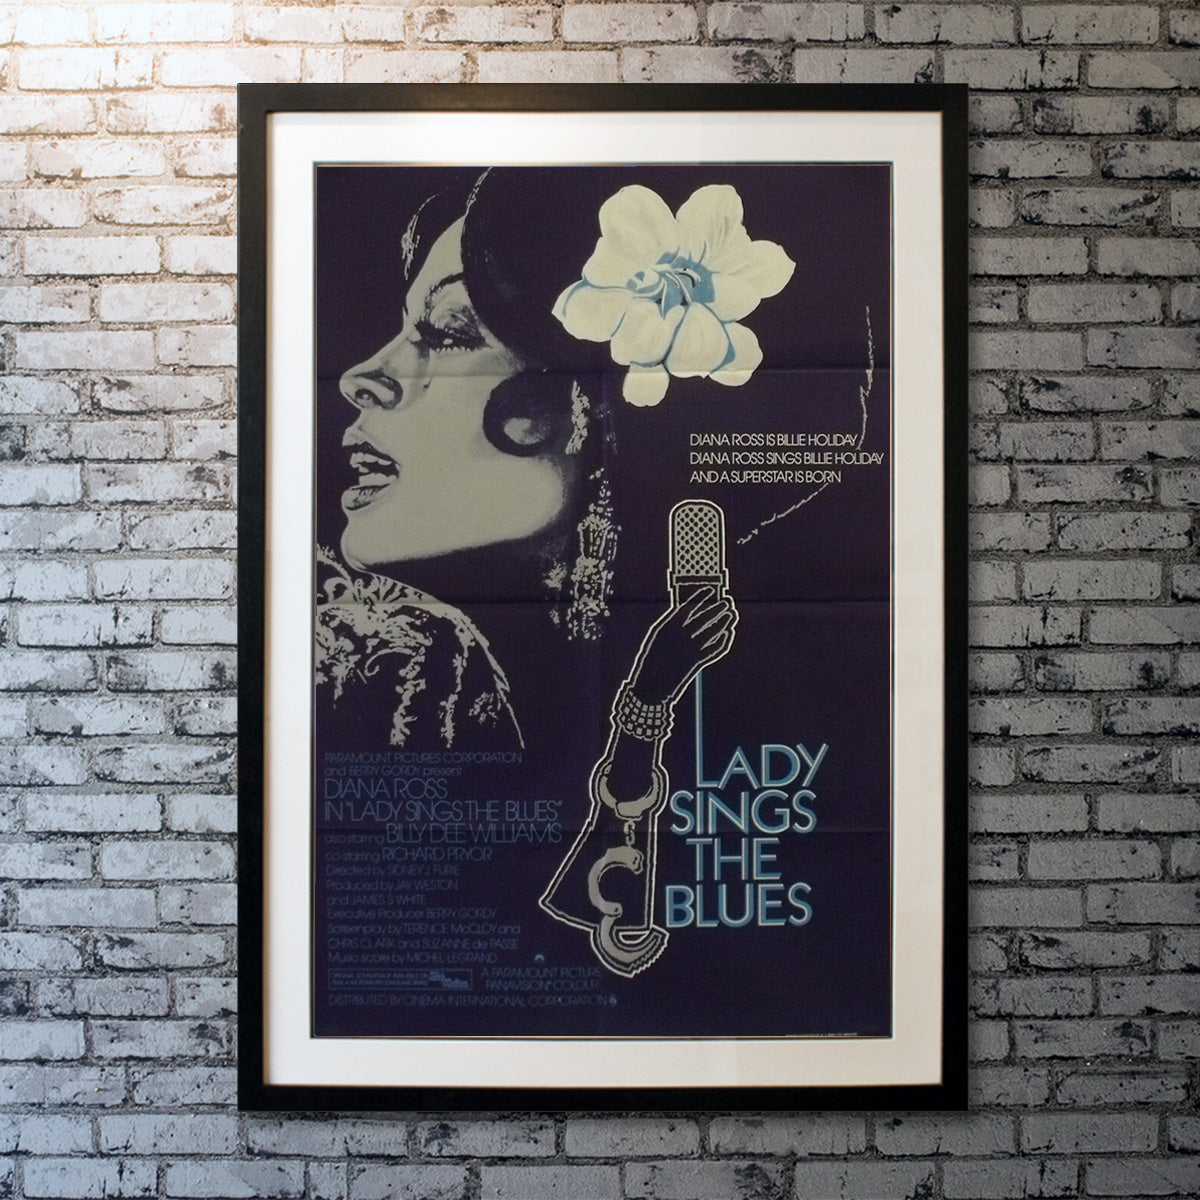 Lady Sings The Blues (1971)